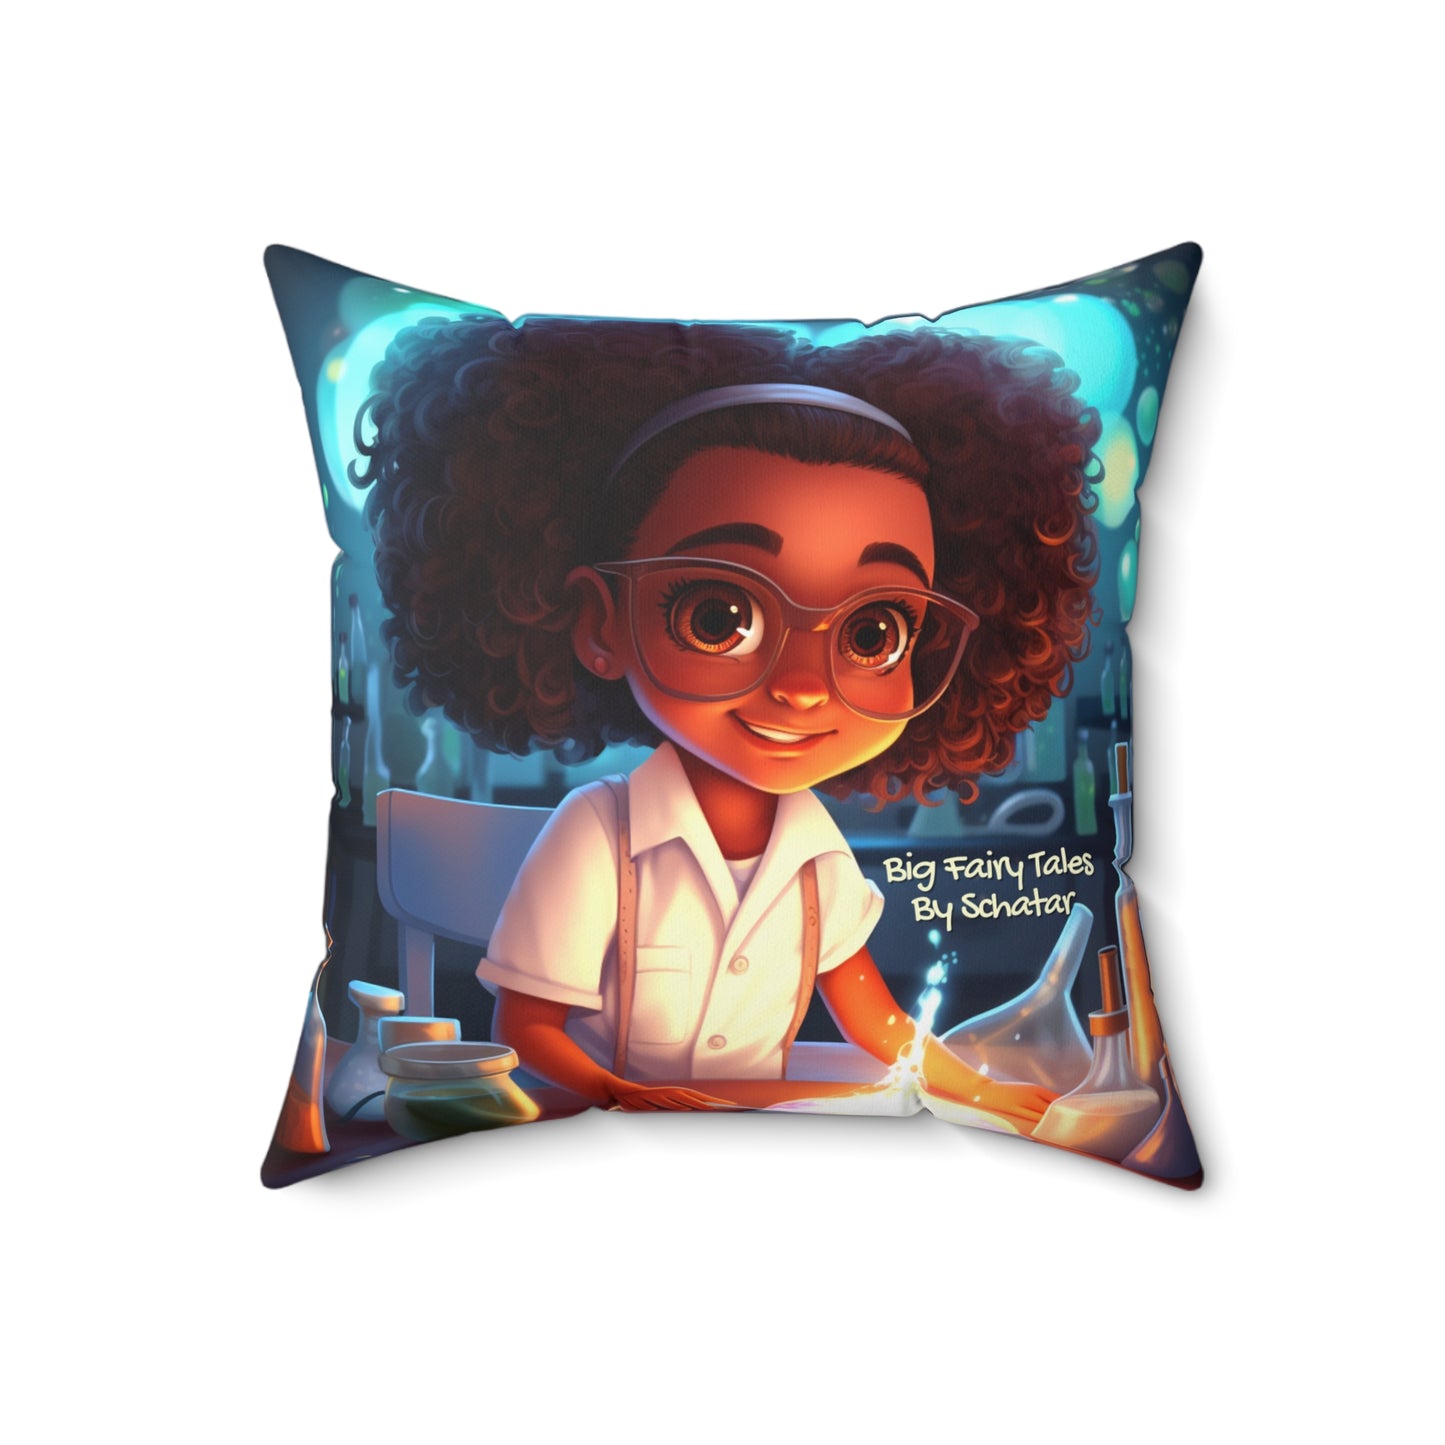 Scientist - Big Little Professionals Plush Pillow 13 From Big Fairy Tales By Schatar